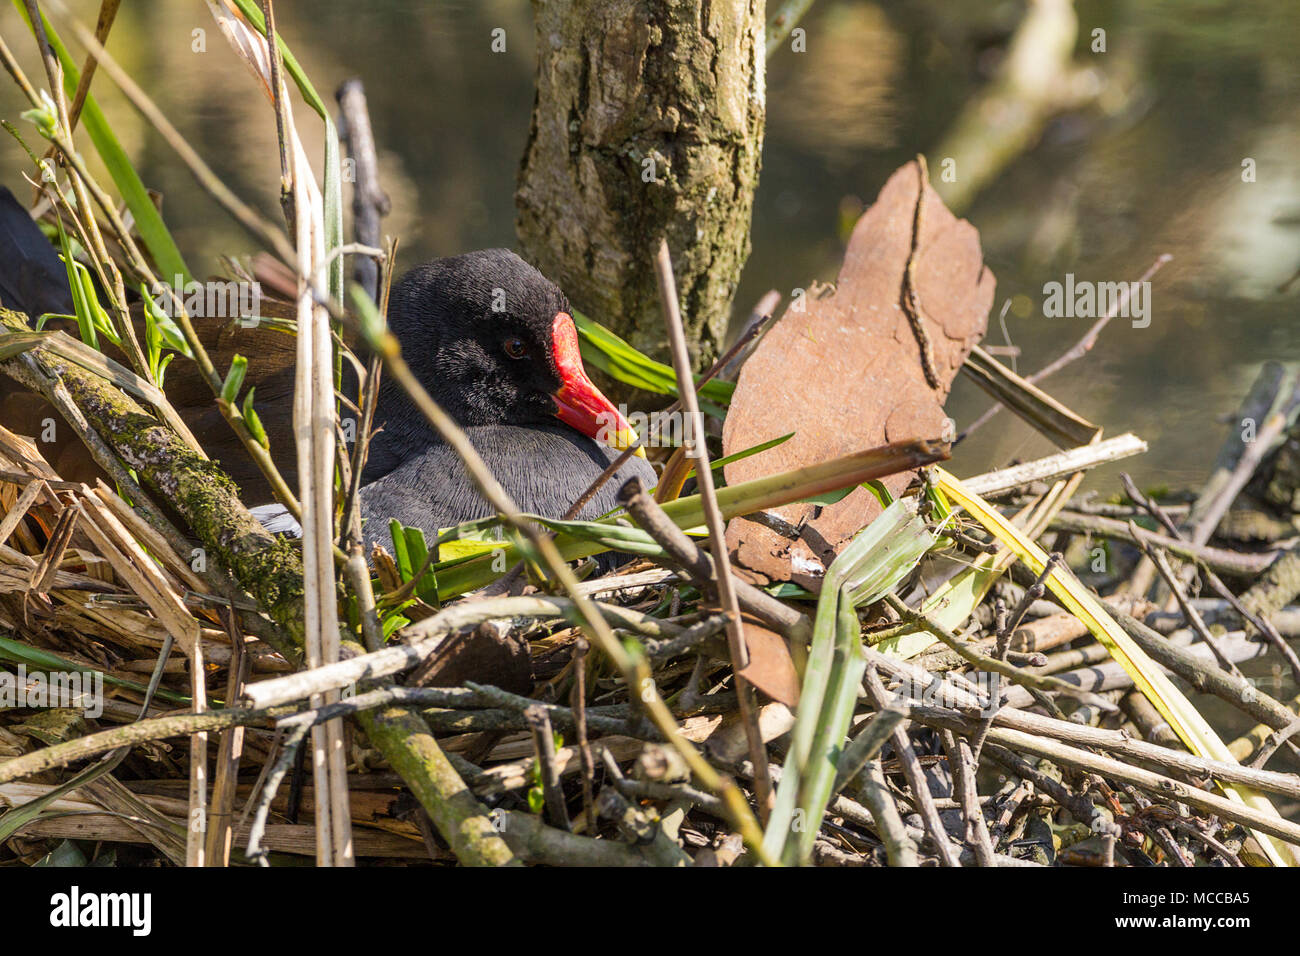 Nesting Moorhen (Gallinula chloropus) on a nest built with sticks reeds vegetation and hardboard waste as an unusual feature. Black plumage red bill. Stock Photo